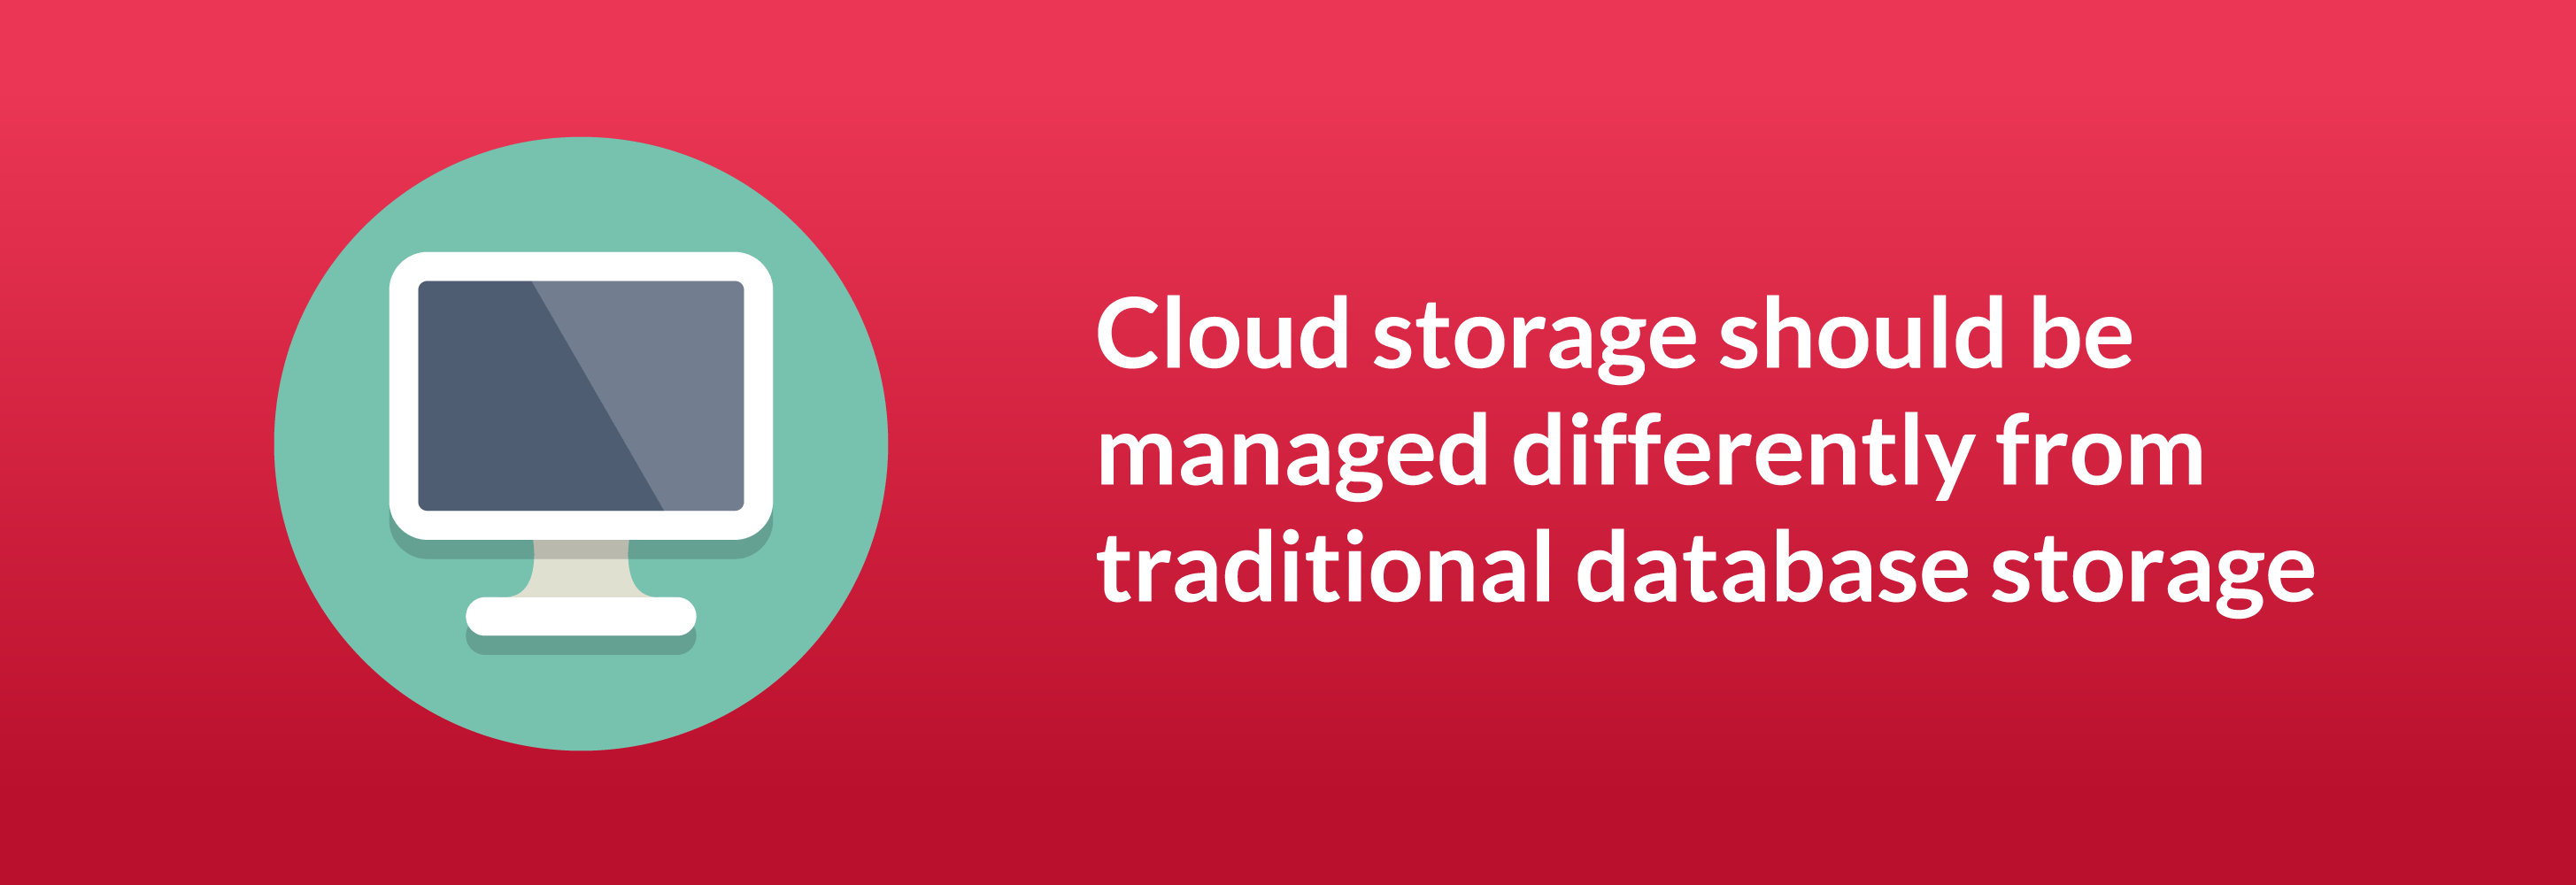 Cloud storage should be managed differently from traditional database storage